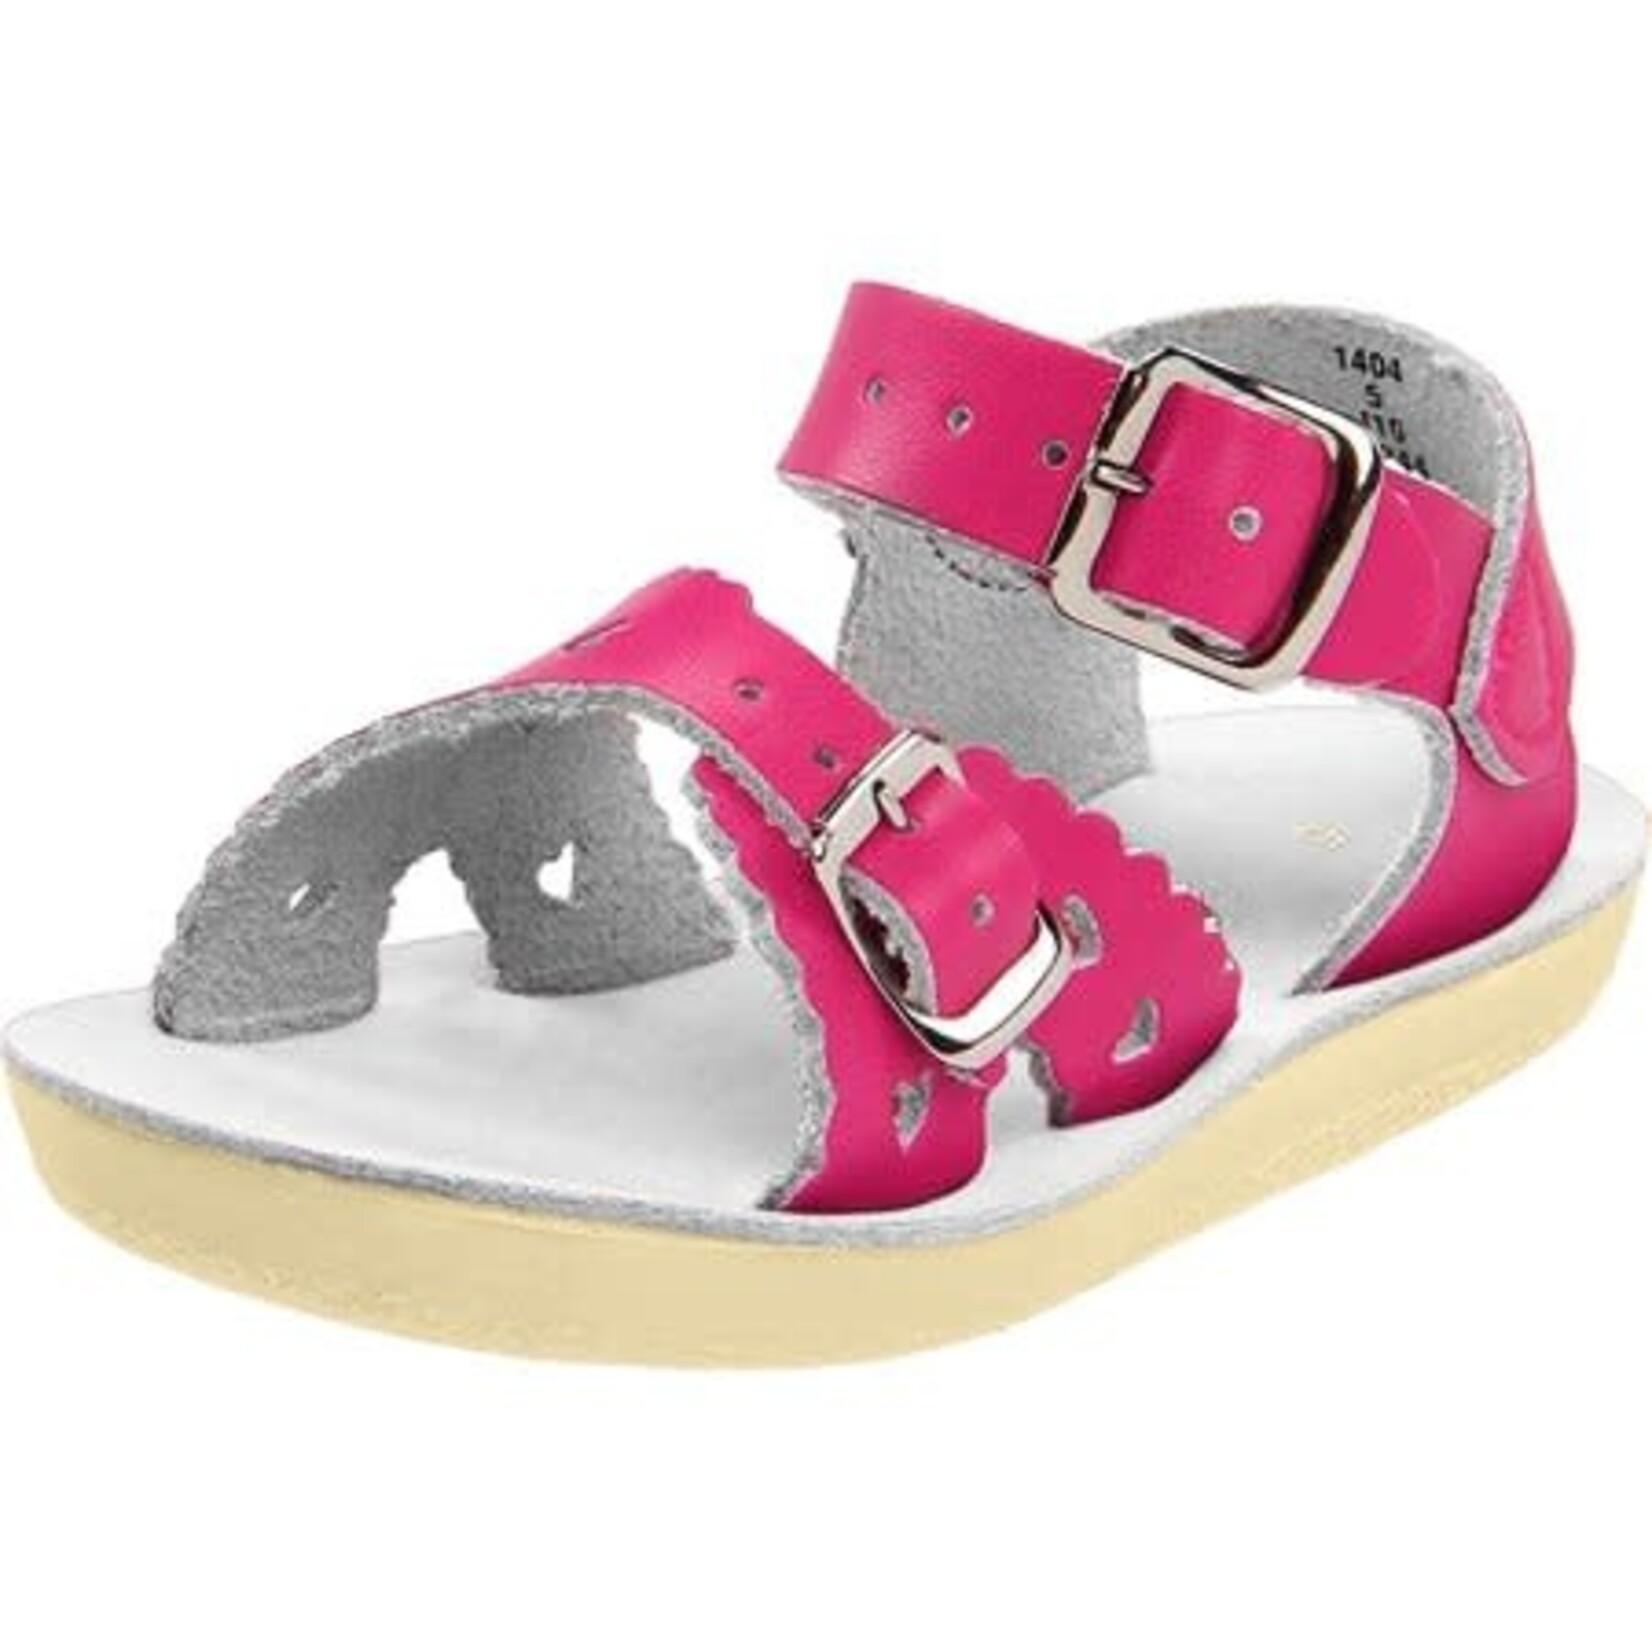 Saltwater Sandals SALTWATER SANDALS - Sandales de cuir à orteils ouverts 'Sweetheart - Shiny fushia''